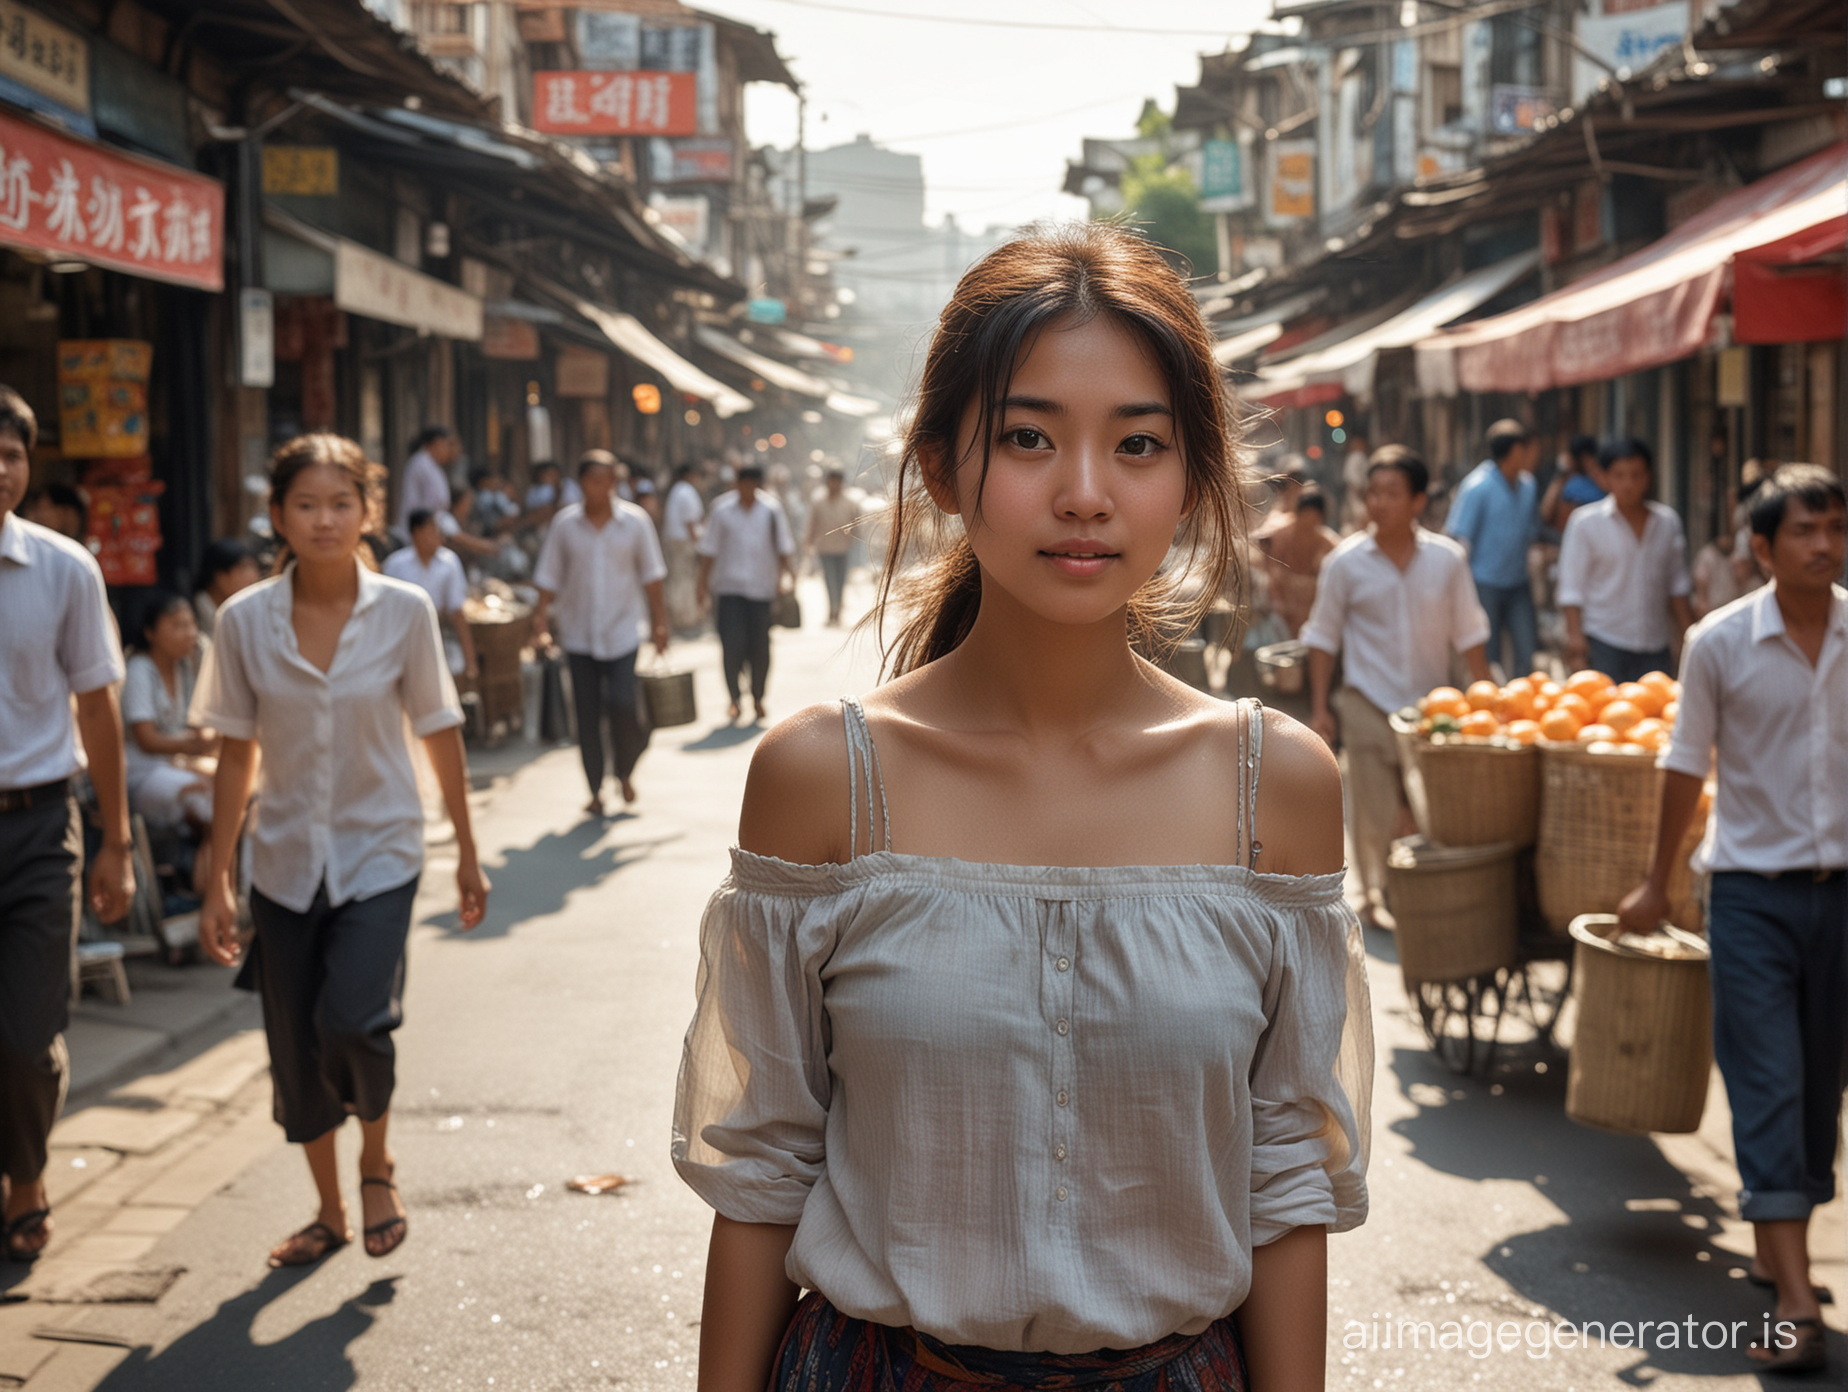 create a high res photo showing detailed skin texture based on:
The scene captures the bustling energy of an Asian market street. In the foreground, a young girl is depicted walking from left to right, carrying two buckets of water balanced on a yoke across her shoulders. She appears to be in her late teens or early twenties, her face glowing with sweat from the heat of the day. Despite the sweat, her flawless skin reflects the sunlight, giving it a uniform sheen that accentuates her features. Her attire consists of an old, worn-out off-shoulder blouse, revealing her shoulders and adding to the sense of heat and exhaustion. Her expression is one of determination, her big eyes and wide grin contrasting with the fatigue evident in her posture. Long lashes frame her eyes, drawing attention to their depth and intensity. Her hair is styled up, showcasing her neck and adding a touch of fashionable flair to her appearance, though it appears slightly disheveled from her exertion. In the background, the street is alive with activity, crowded with hawkers and shoppers, adding to the vibrant atmosphere of the market scene. Despite the challenges she faces, the girl's resilience and spirit shine through, embodying the hustle and bustle of life in the market.